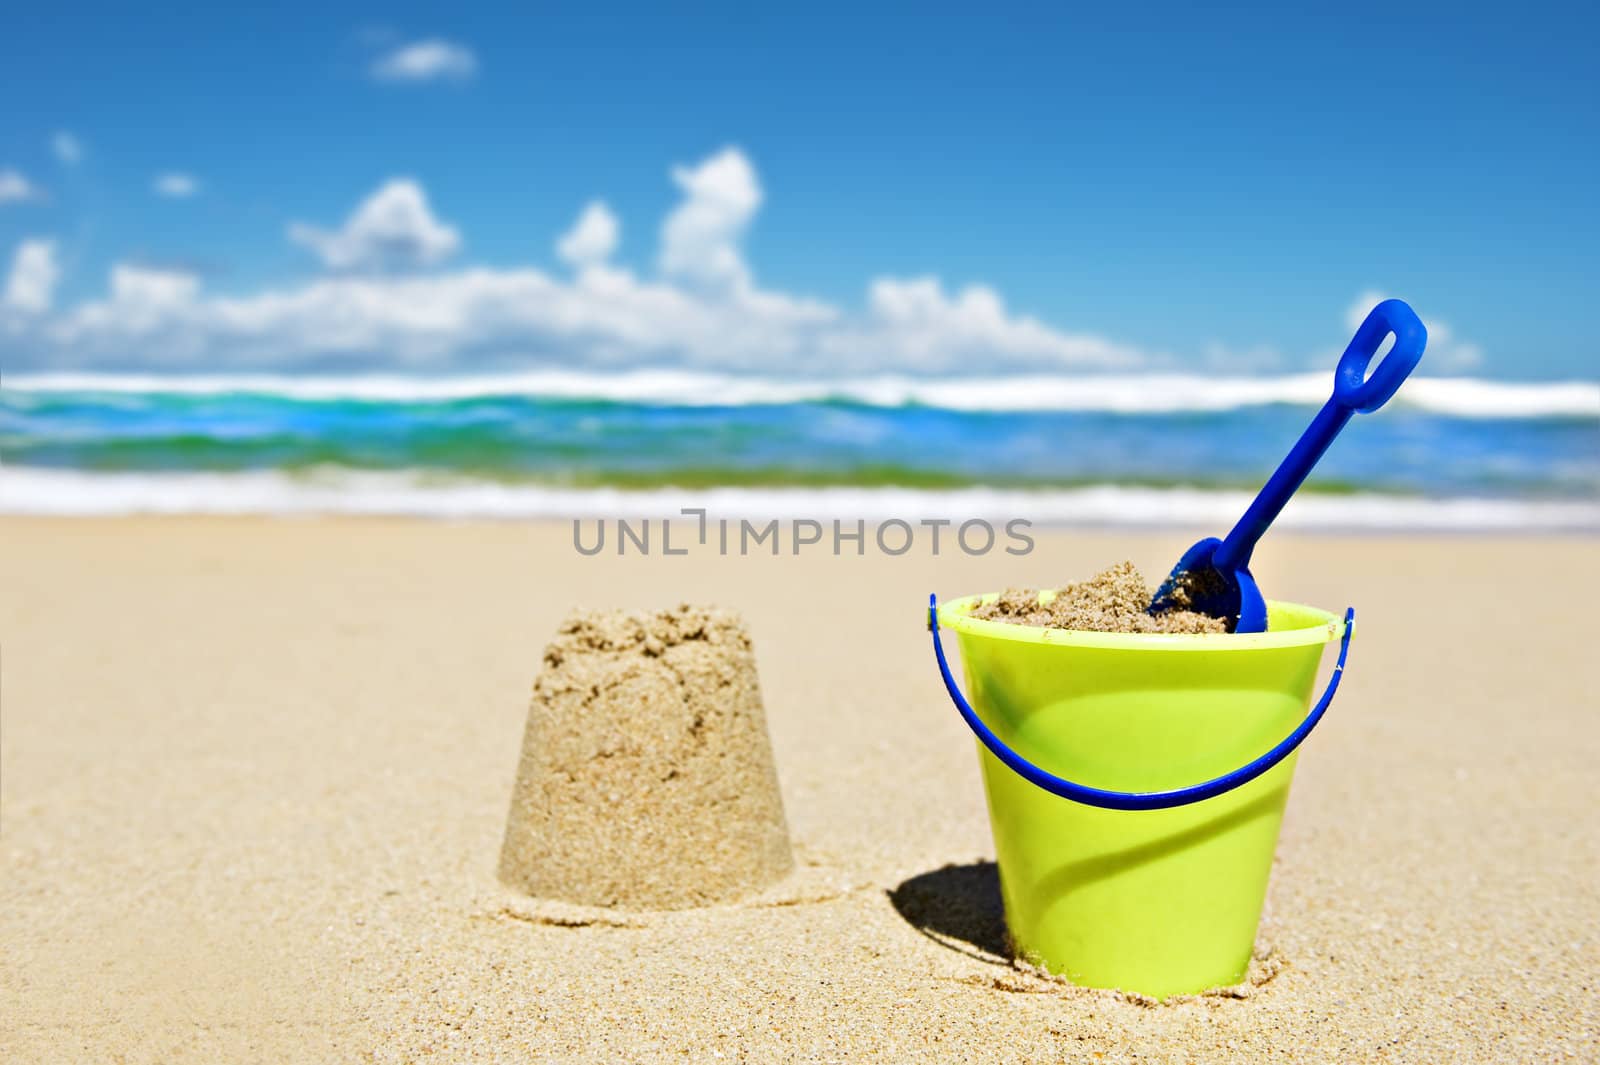 Toy bucket and shovel on the beach on a sunny day